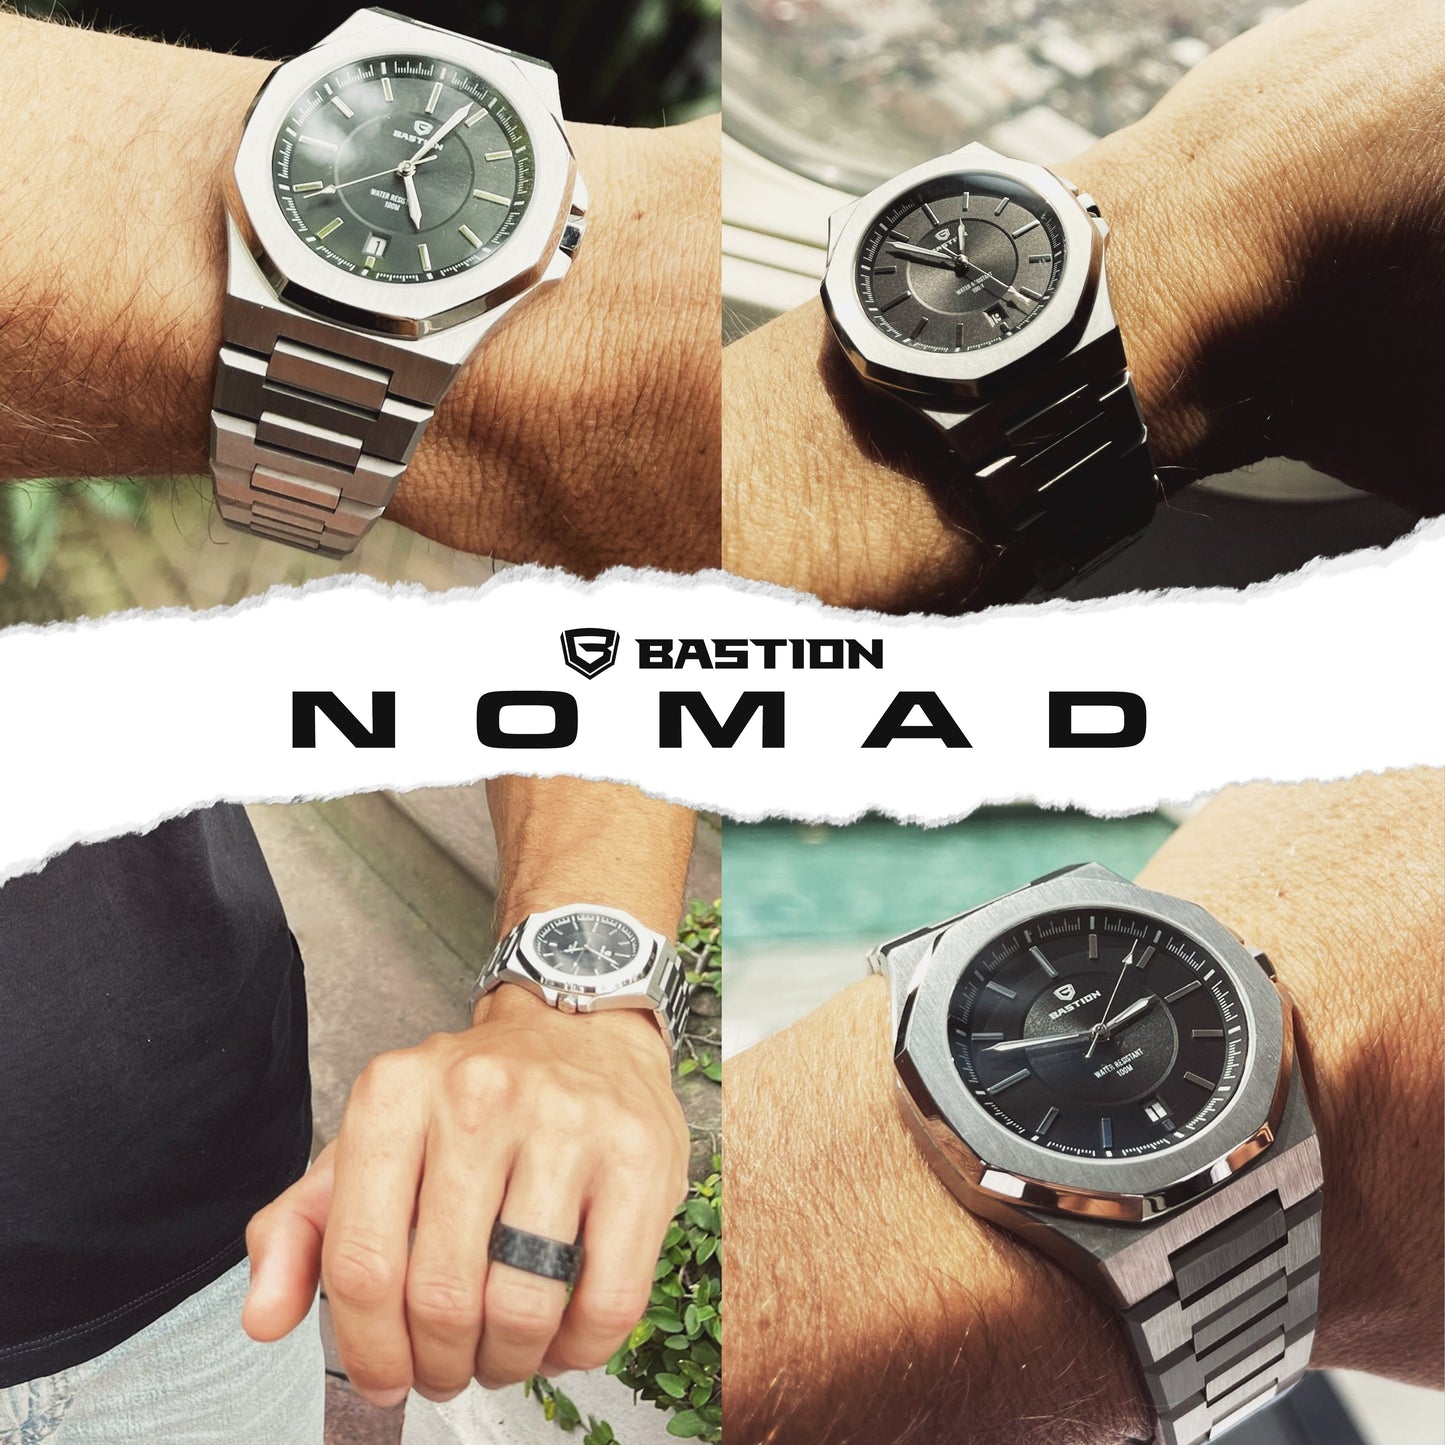 NOMAD - STAINLESS STEEL AUTOMATIC 42MM WATCH, WATERPROOF 10ATM (100m) - Bastion Bolt Action Pen